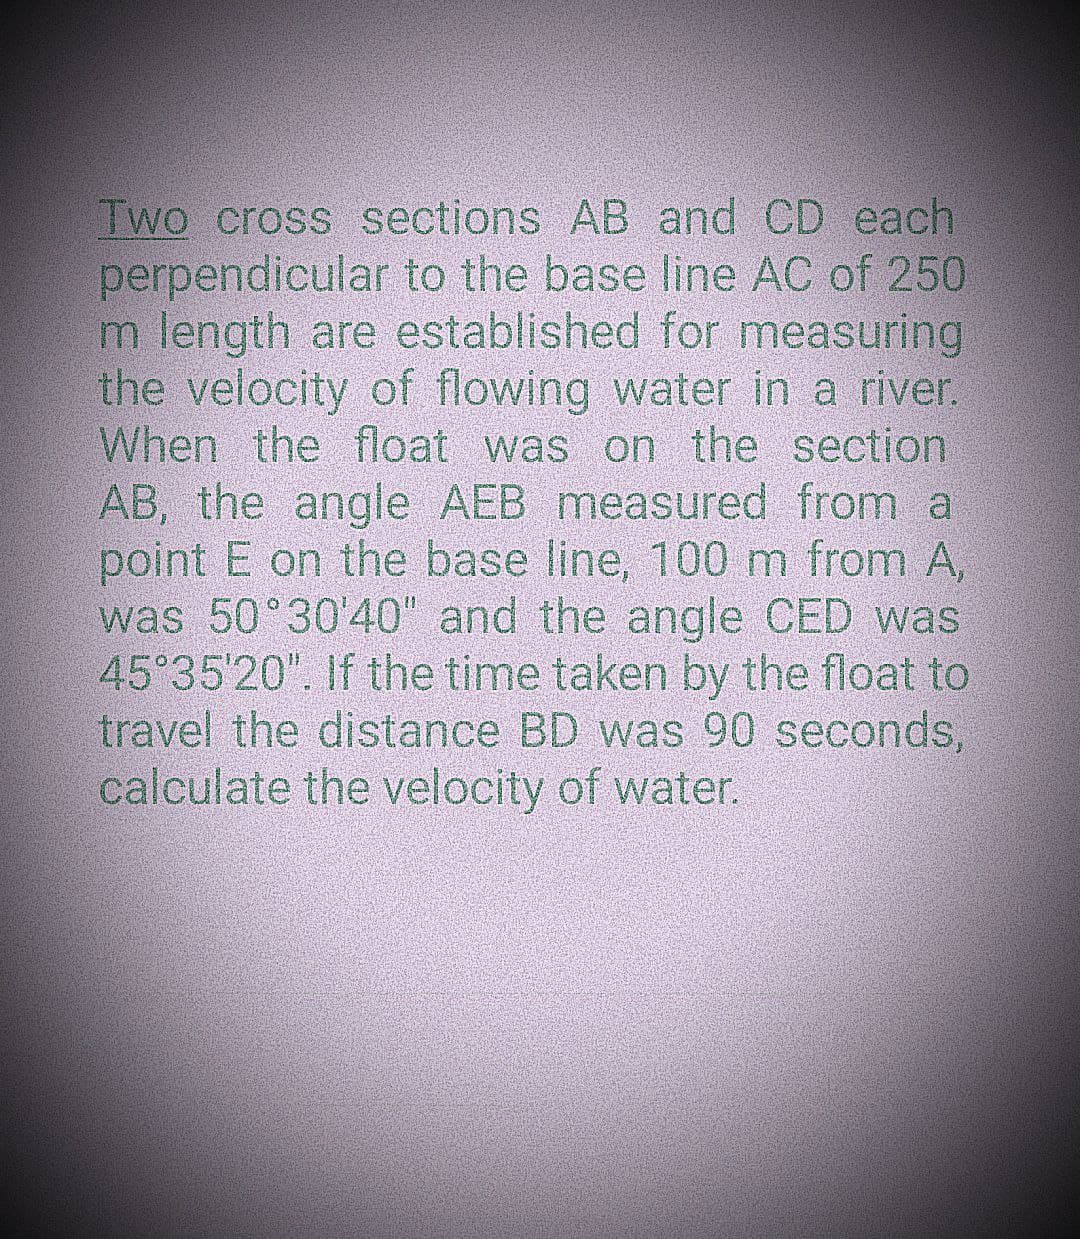 Two cross sections AB and CD each
perpendicular to the base line AC of 250
m length are established for measuring
the velocity of flowing water in a river.
When the float was on the section.
AB, the angle AEB measured from a
point E on the base line, 100 m from A,
was 50°30'40" and the angle CED was
45°35'20". If the time taken by the float to
travel the distance BD was 90 seconds,
calculate the velocity of water.